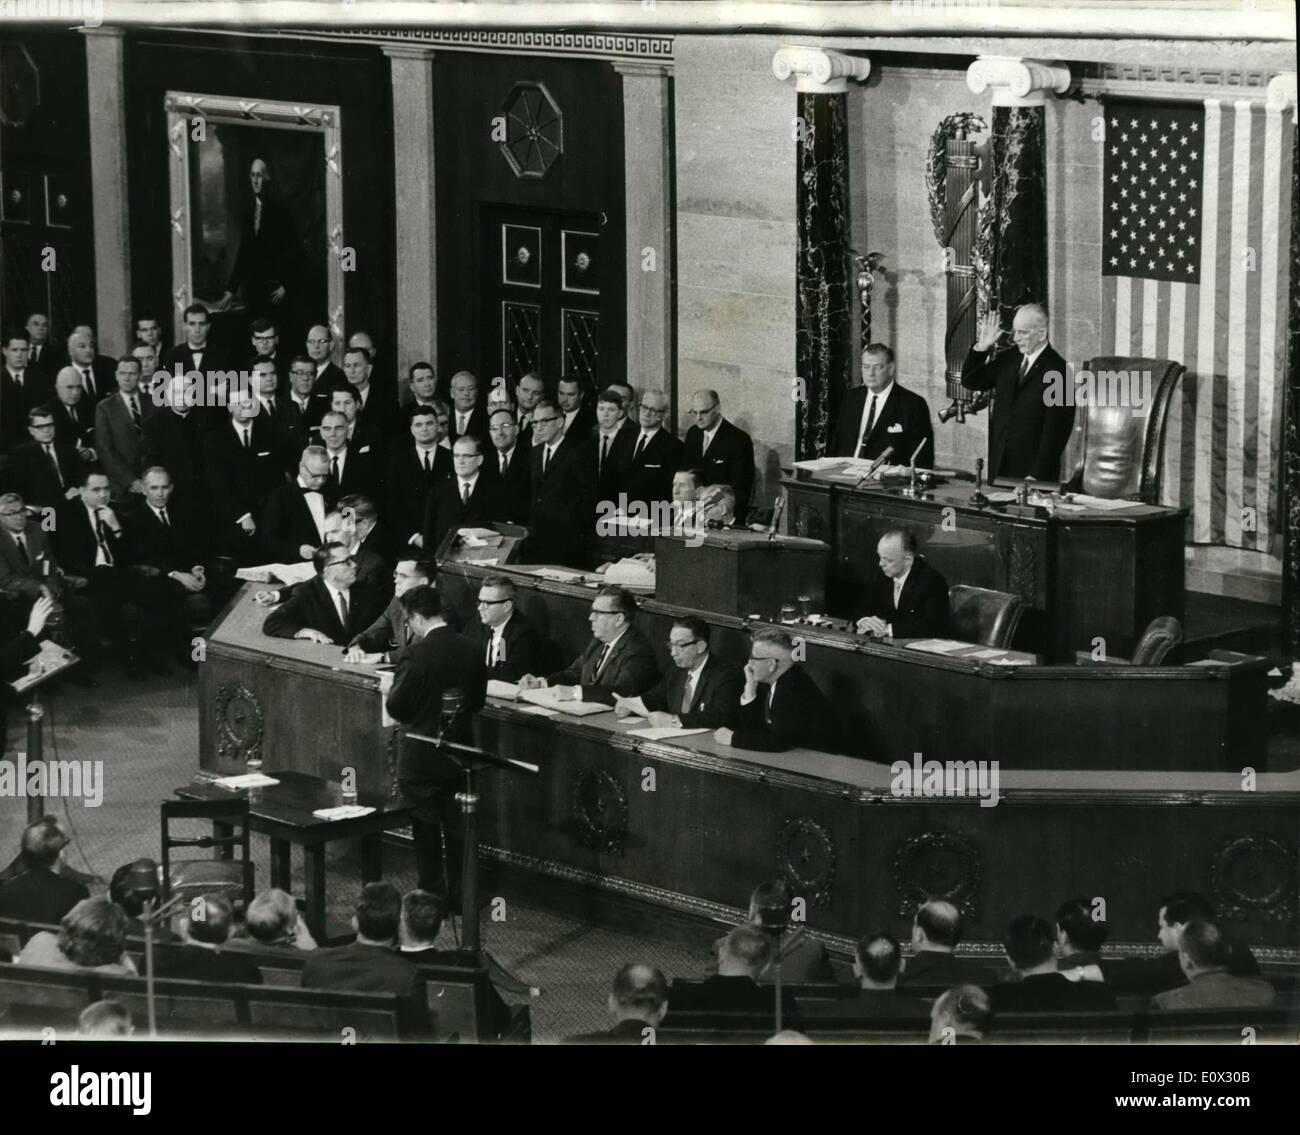 Jan. 01, 1965 - New Speaker of the 89th. Congress Sworn-in.: The 89th. Congress was convened in Washington recently. The new congressman were sworn in a new speaker of the house Mr. John McCormack of Massachusetts was sworn in. Photo shows Mr. John McCormack at the Speaker's Chair is sworn-in by the oldest congressman - Mr. Emmanuel Celler seen in lower left hand corner. (Mr. Celler has seen 40 years service) Stock Photo